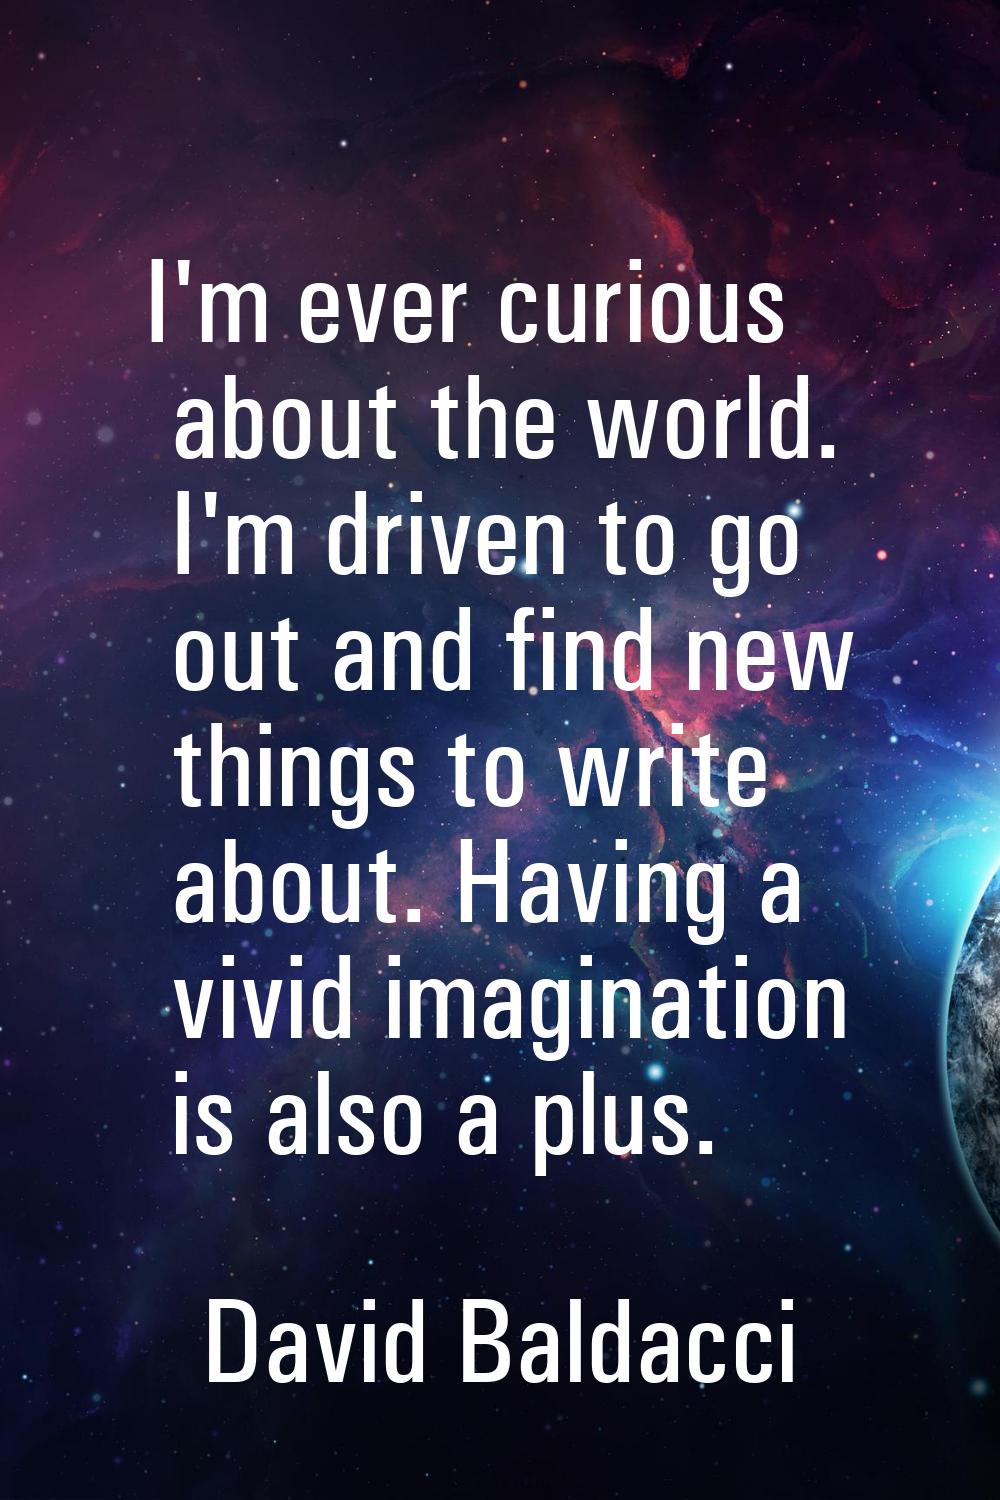 I'm ever curious about the world. I'm driven to go out and find new things to write about. Having a